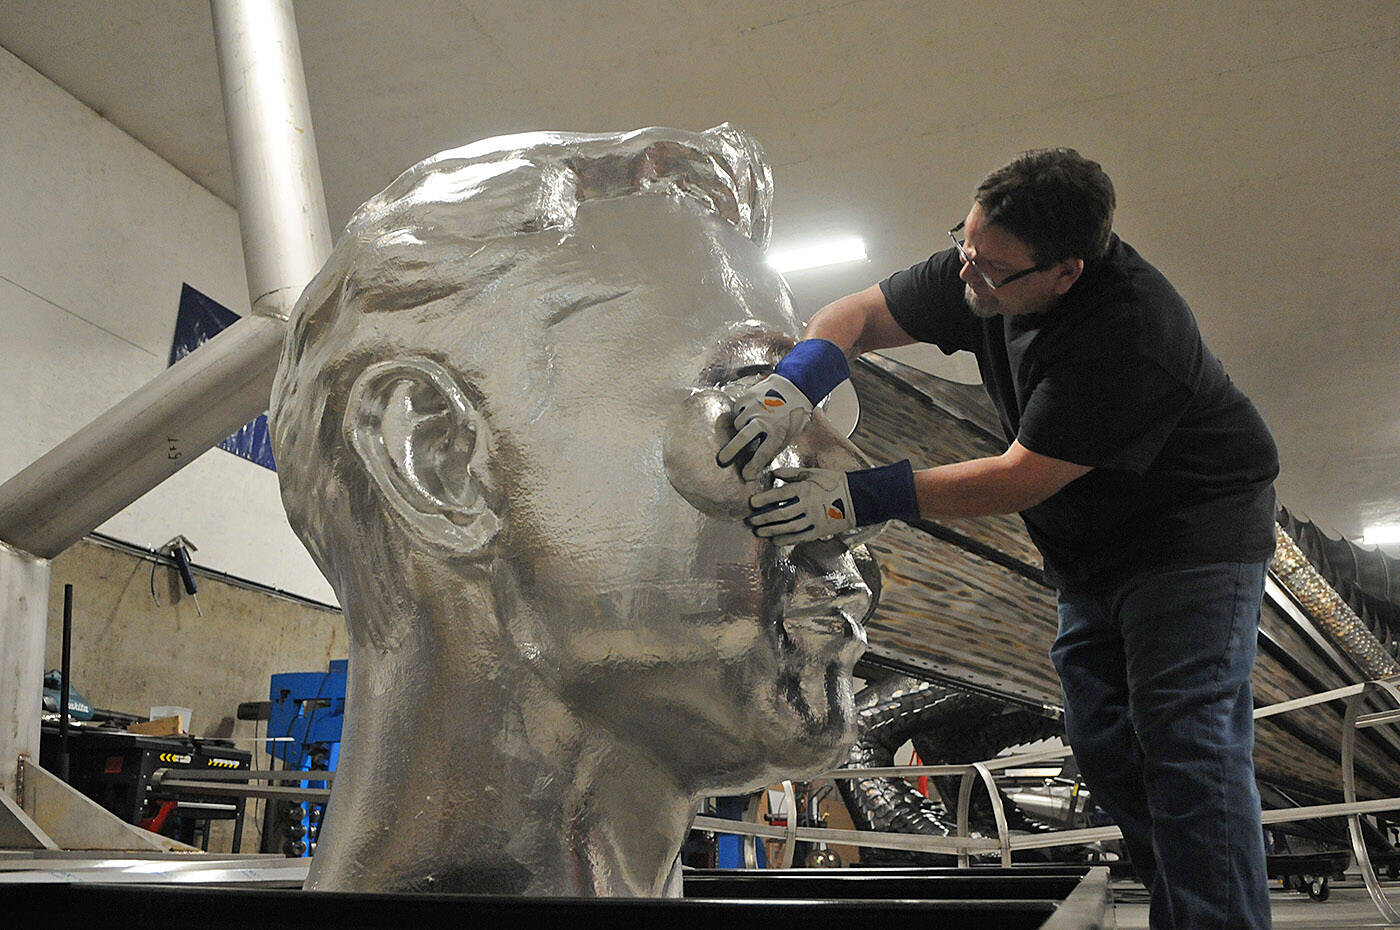 Chilliwack sculptor Kevin Stone fits pieces of aluminum to a gigantic Elon Musk head in his workshop on Tuesday, Jan. 18, 2022. (Jenna Hauck/ Chilliwack Progress)